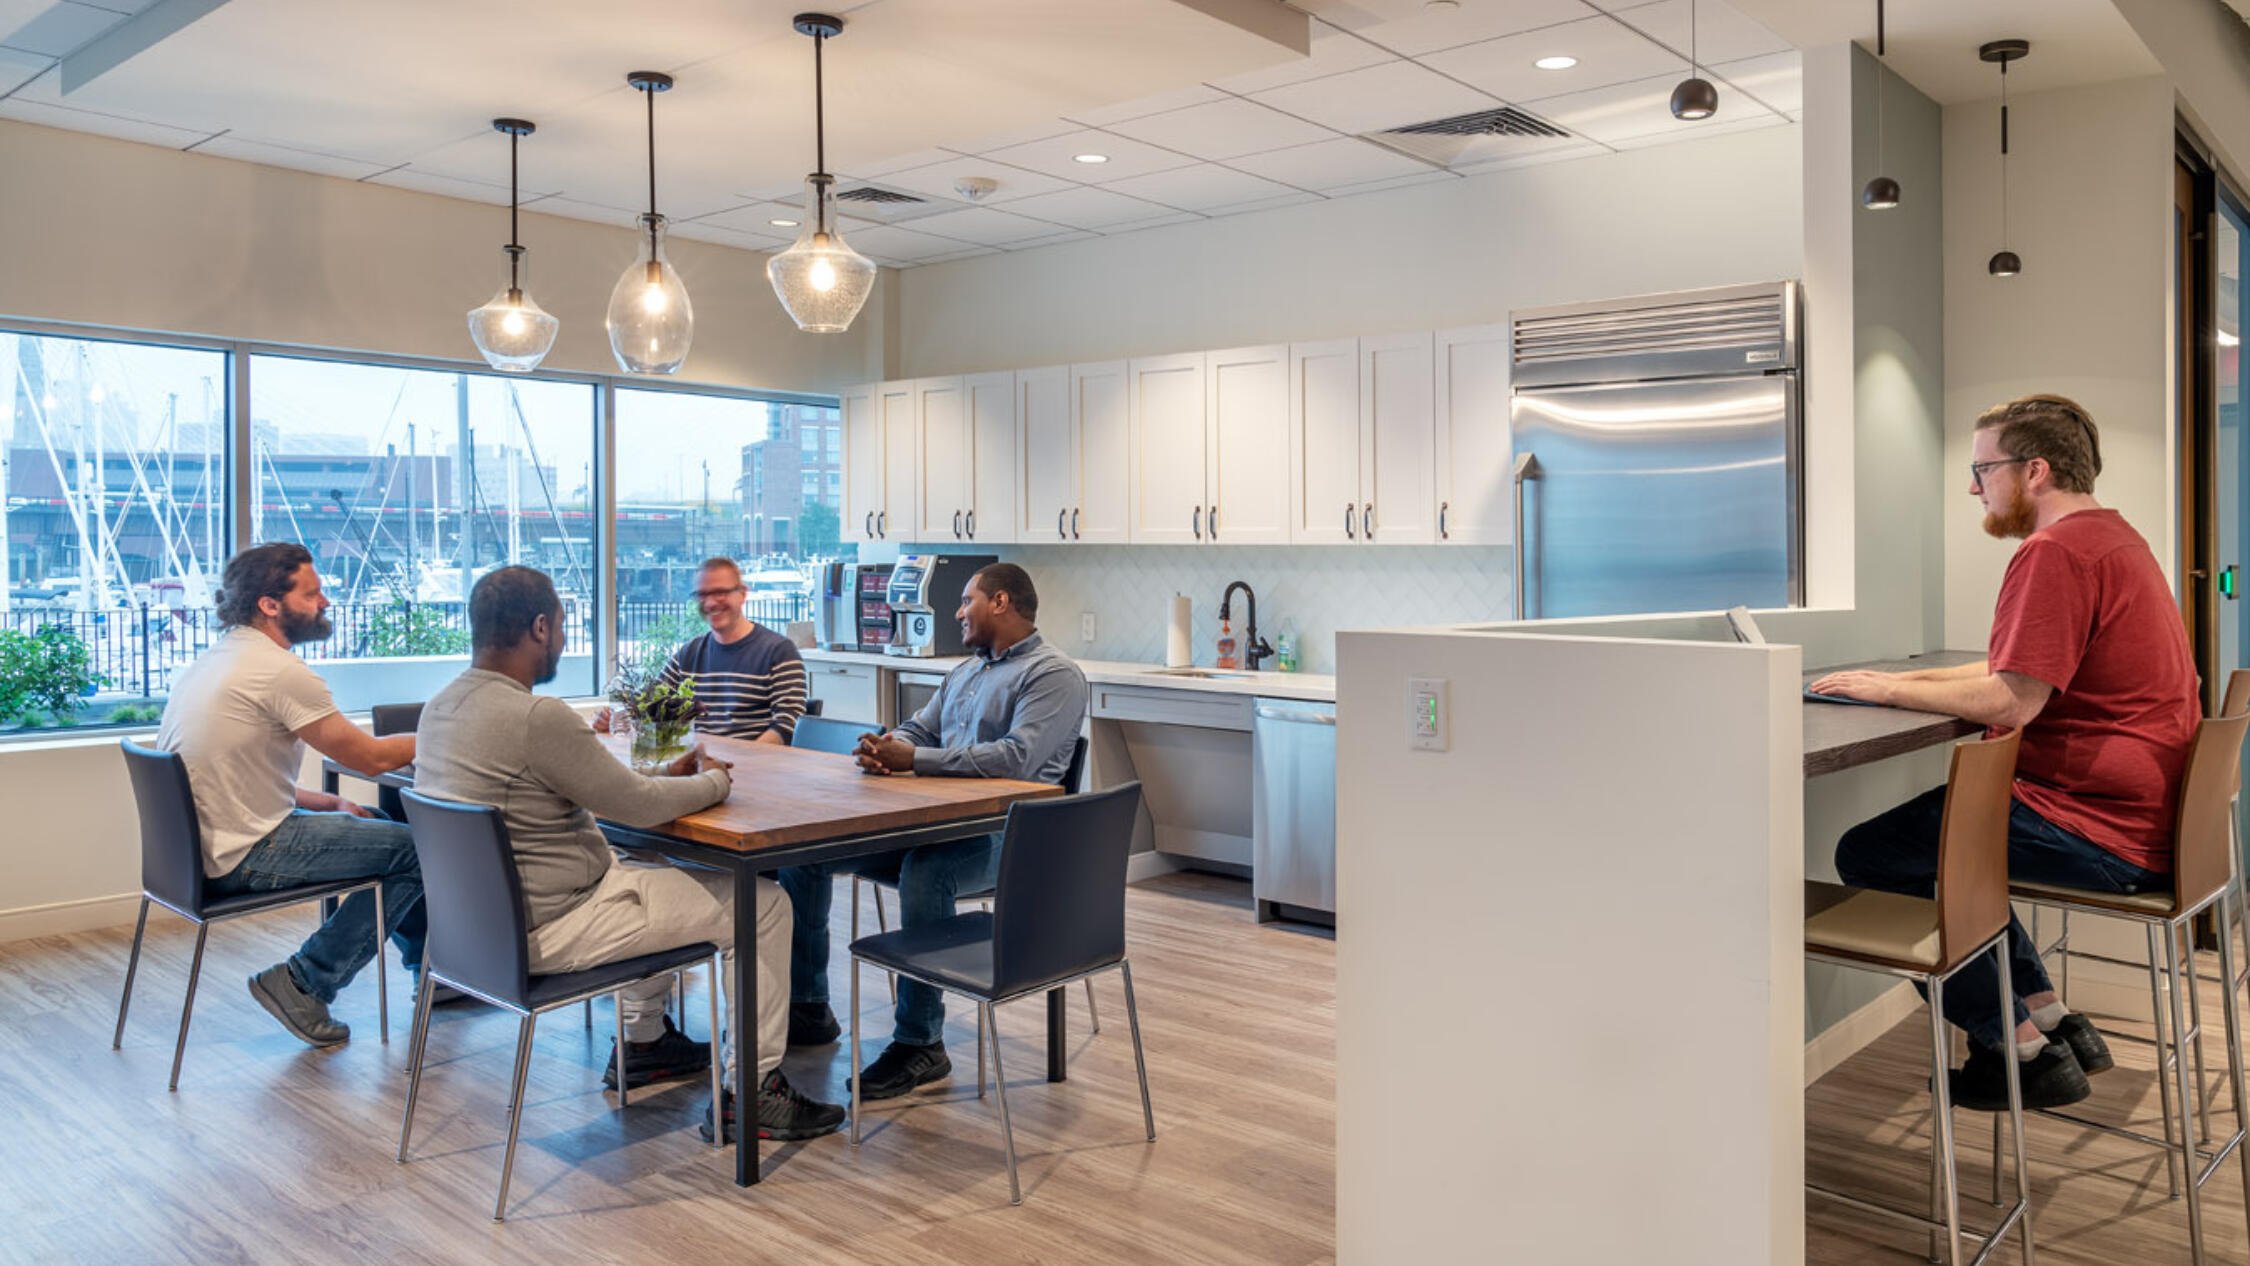 Office break room with employees conversing at a table near a kitchenette, with a view of moored sailboats out the window behind them